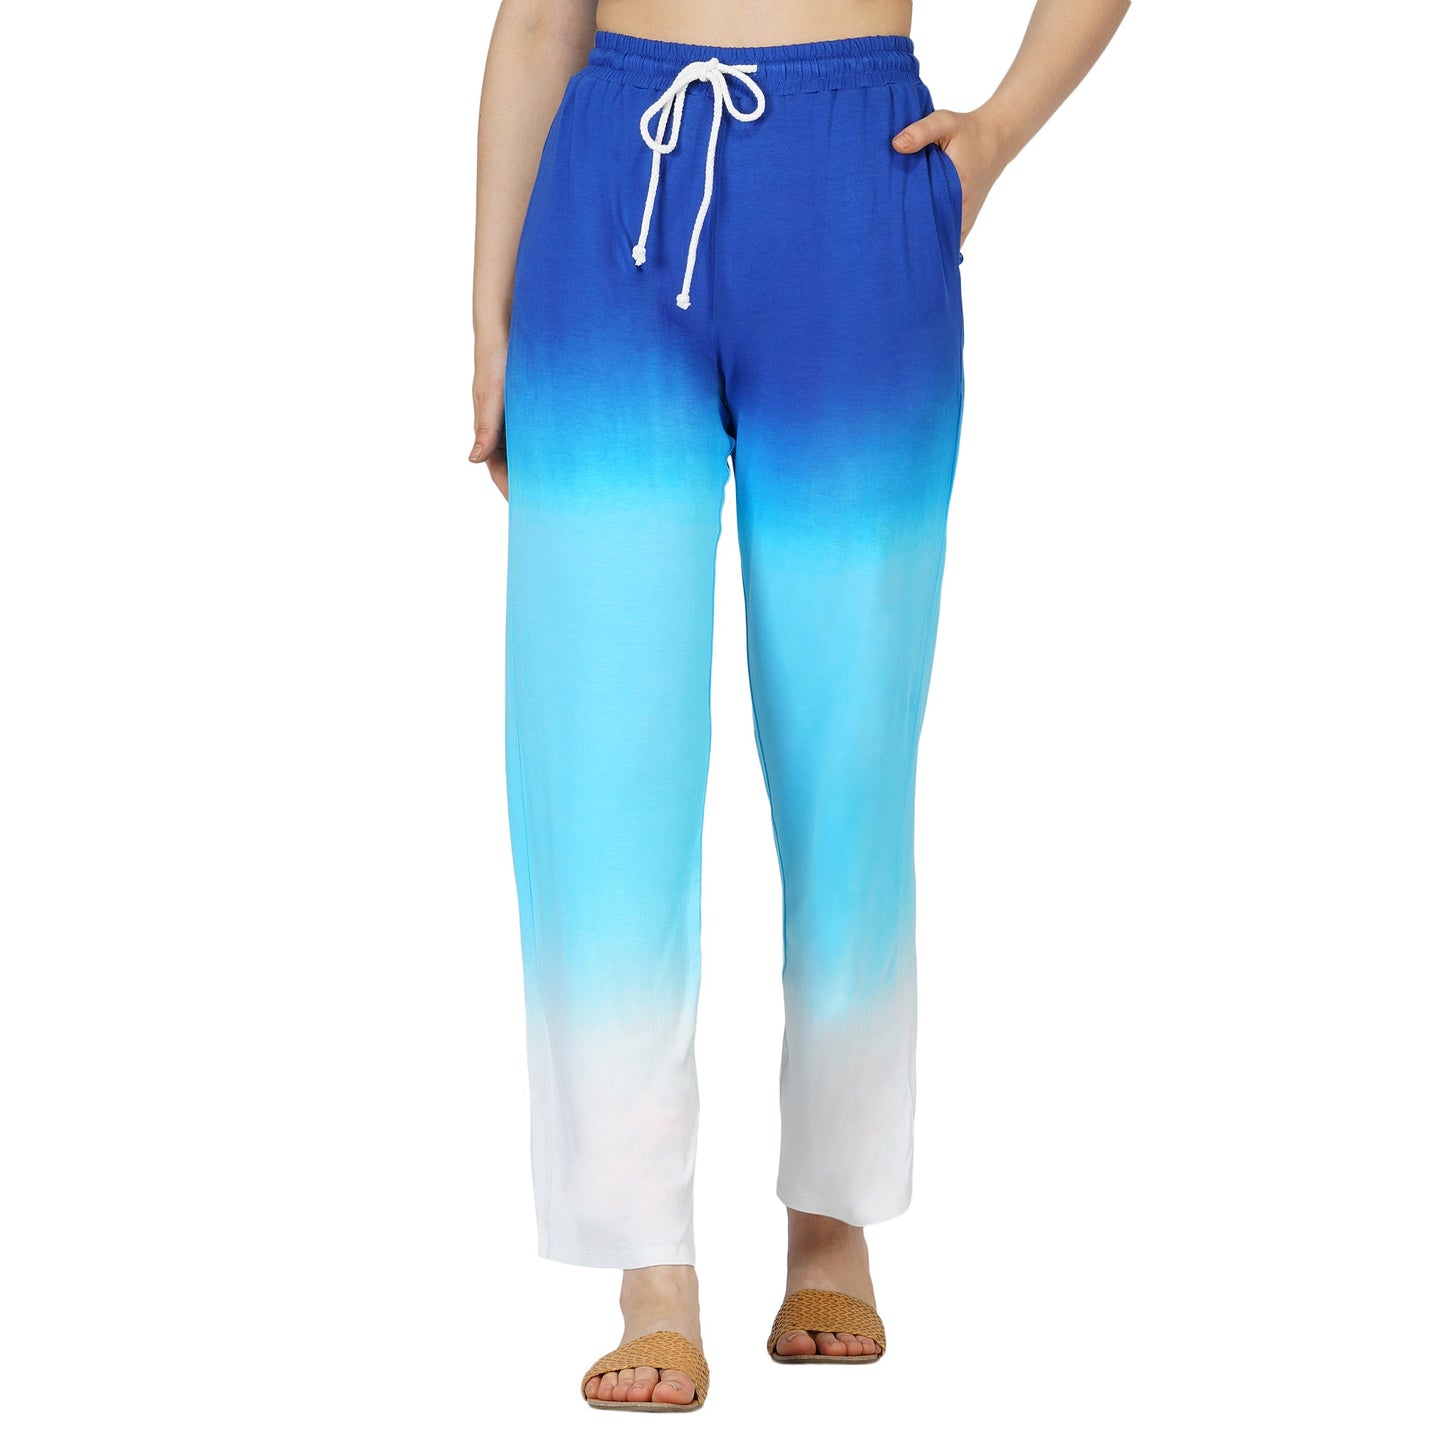 SLAY. Women's Blue to White Ombre Pants